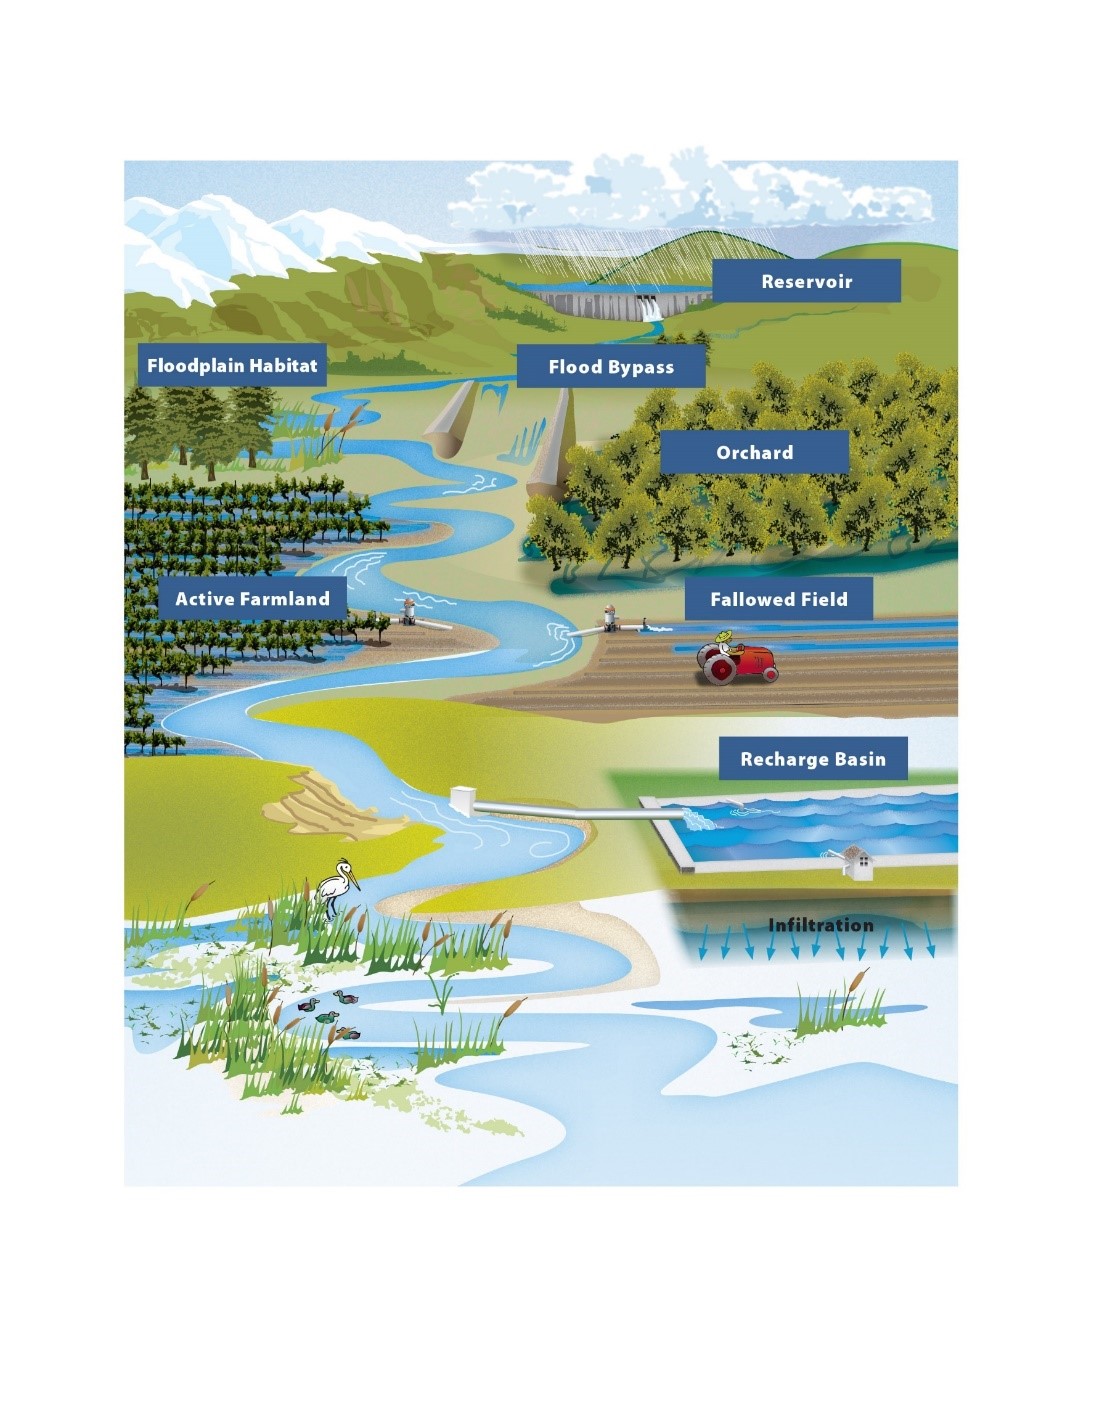 NRCS Launches Second Year of Groundwater Recharge Pilot Program